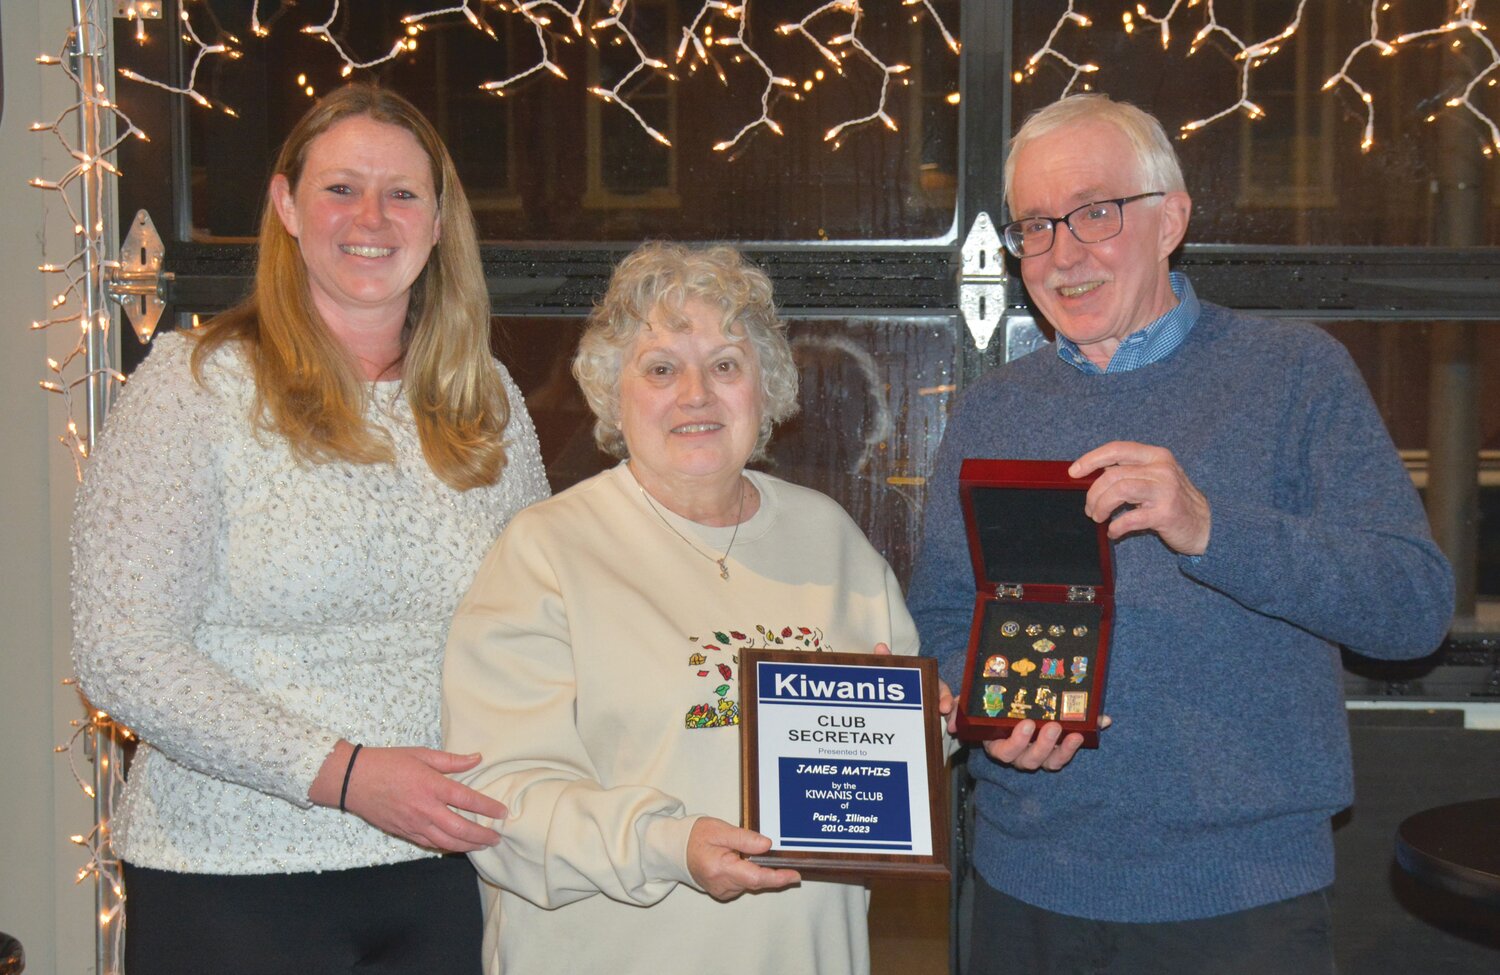 Betsey Higginbotham (left) and Dennis Theil (right) members of the Paris Kiwanis Club presented a plaque to Cindy Mathis (center), the widow of Jim Mathis, a long-time member of the Club.